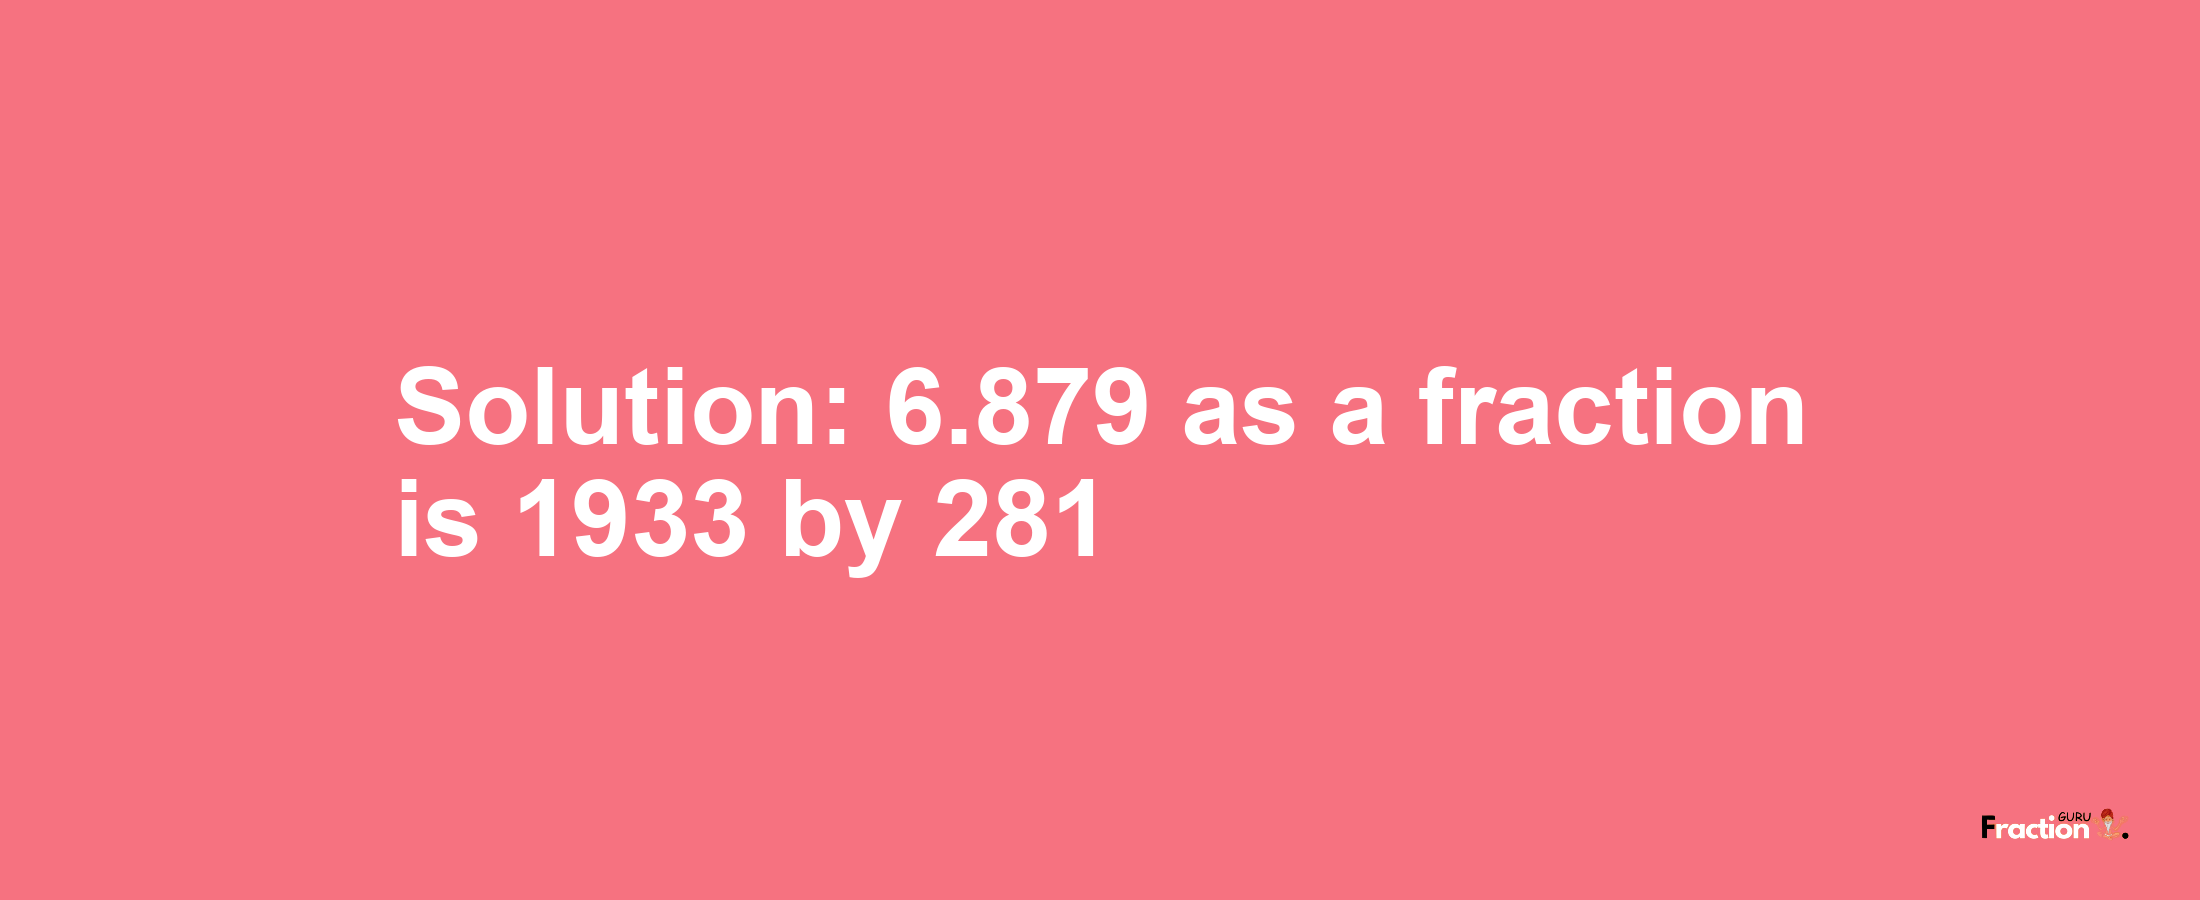 Solution:6.879 as a fraction is 1933/281